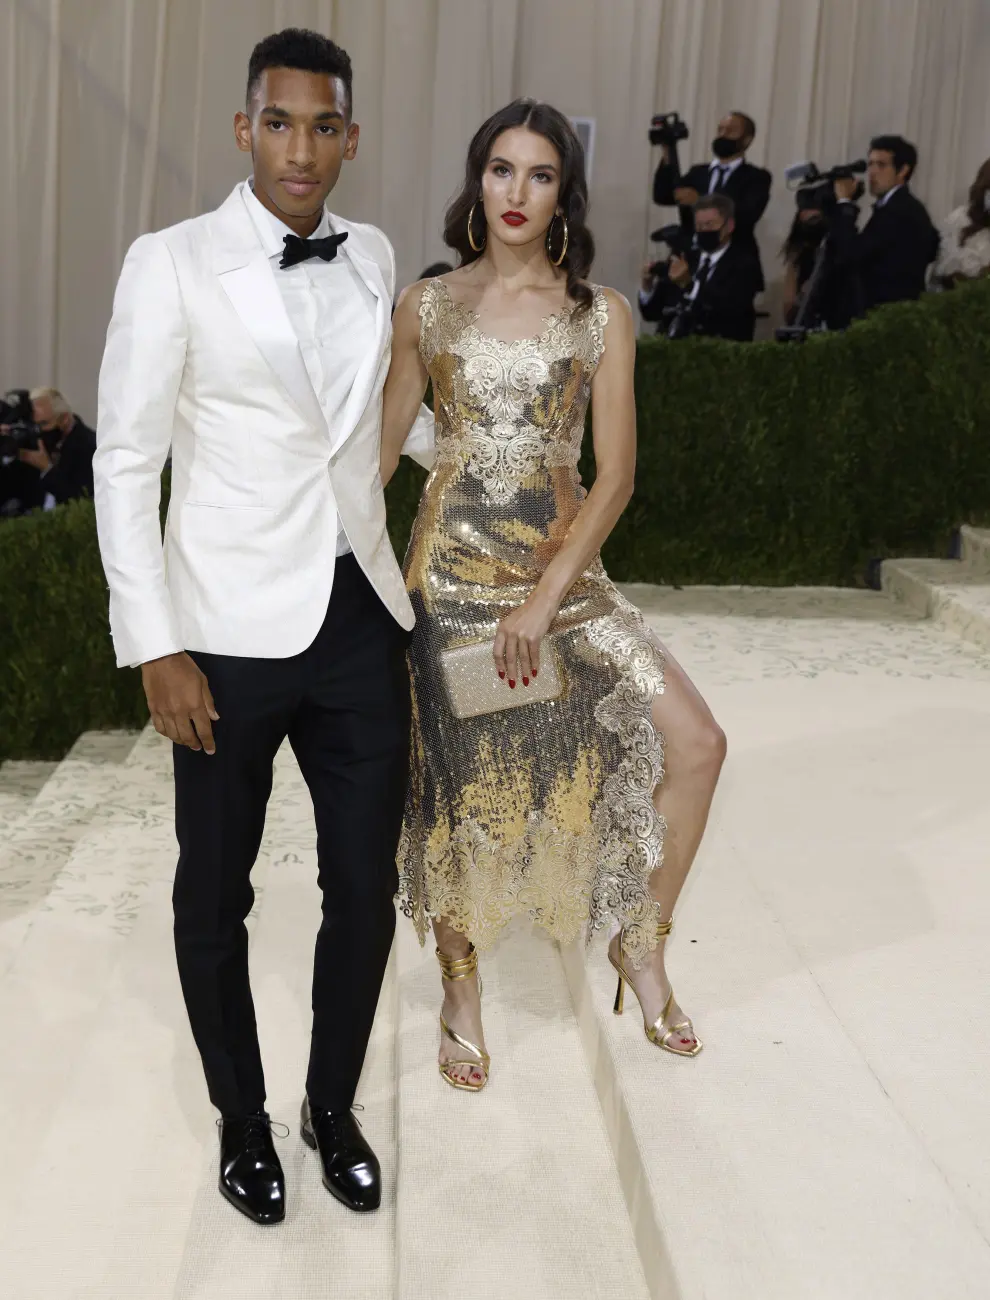 New York (United States), 13/09/2021.- Russell Westbrook poses on the red carpet for the 2021 Met Gala, the annual benefit for the Metropolitan Museum of Art's Costume Institute, in New York, New York, USA, 13 September 2021. The event coincides with the Met Costume Institute's first two-part exhibition, 'In America: A Lexicon of Fashion' which opens 18 September 2021, to be followed by 'In America: An Anthology of Fashion' which opens 05 May 2022 and both conclude 05 September 2022. (Moda, Abierto, Estados Unidos, Nueva York) EFE/EPA/JUSTIN LANE
 USA NEW YORK MET GALA